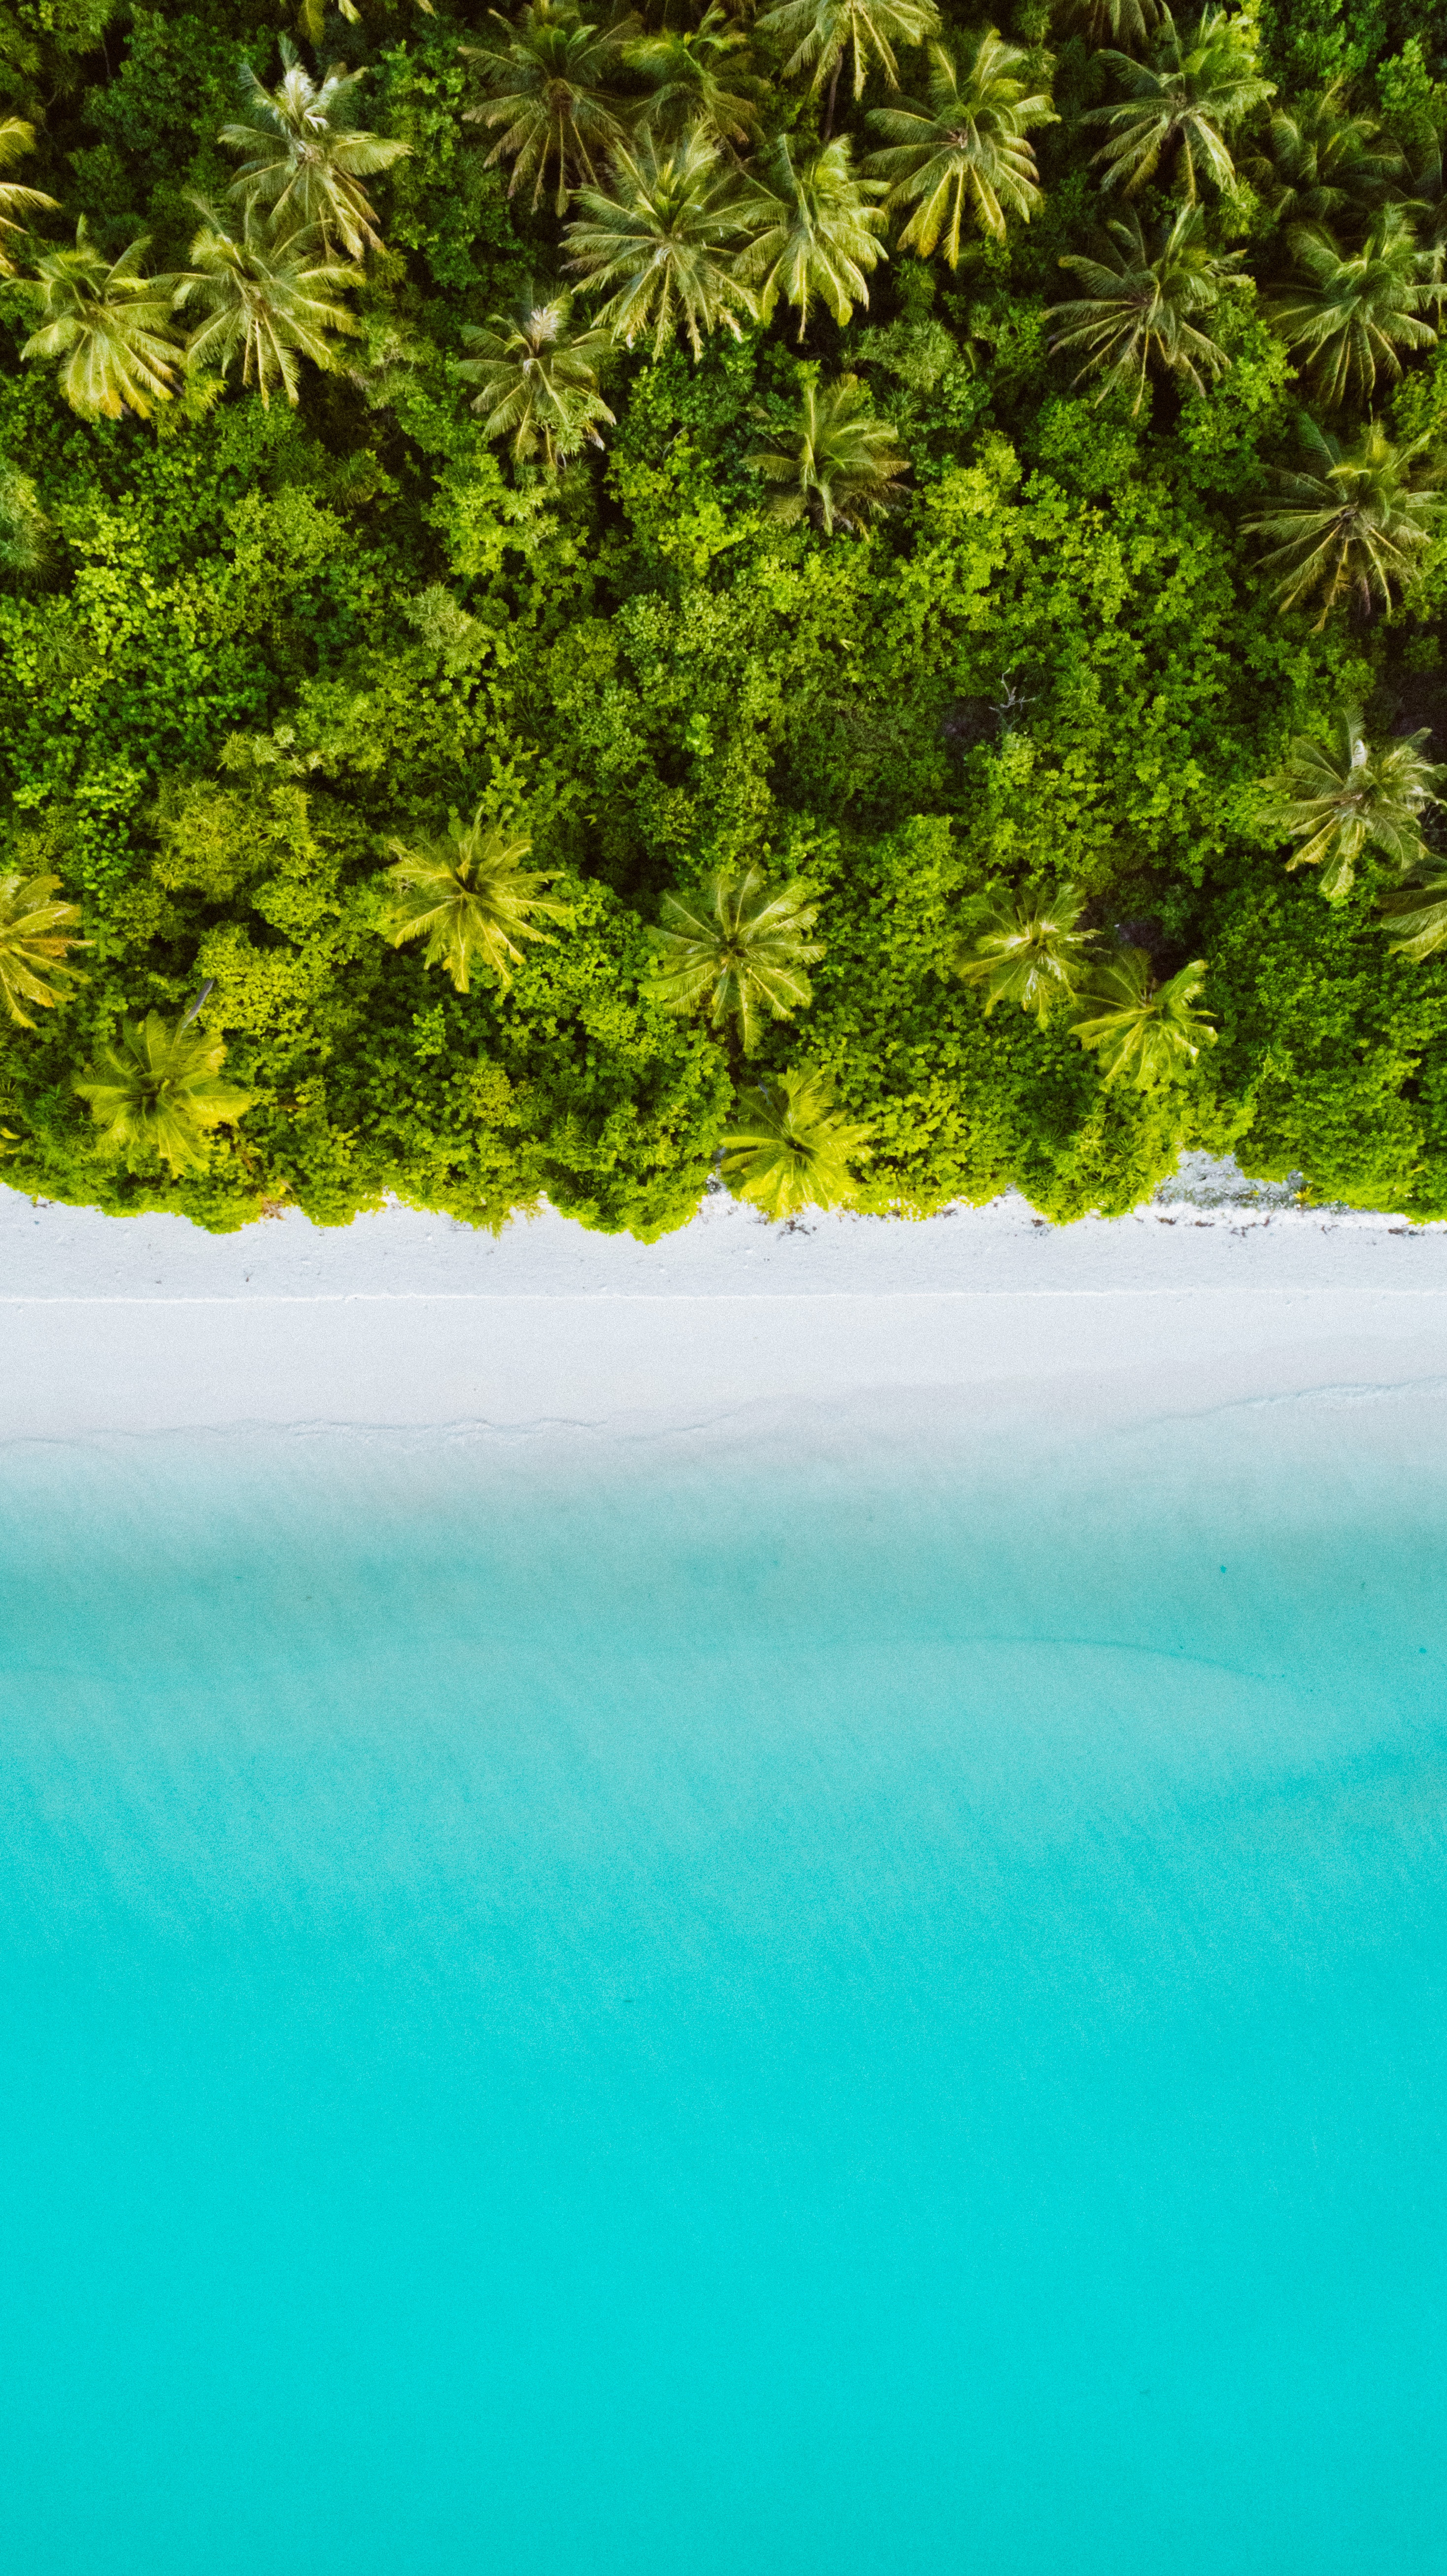 maldives, view from above, ocean, nature, beach, palms, tropics